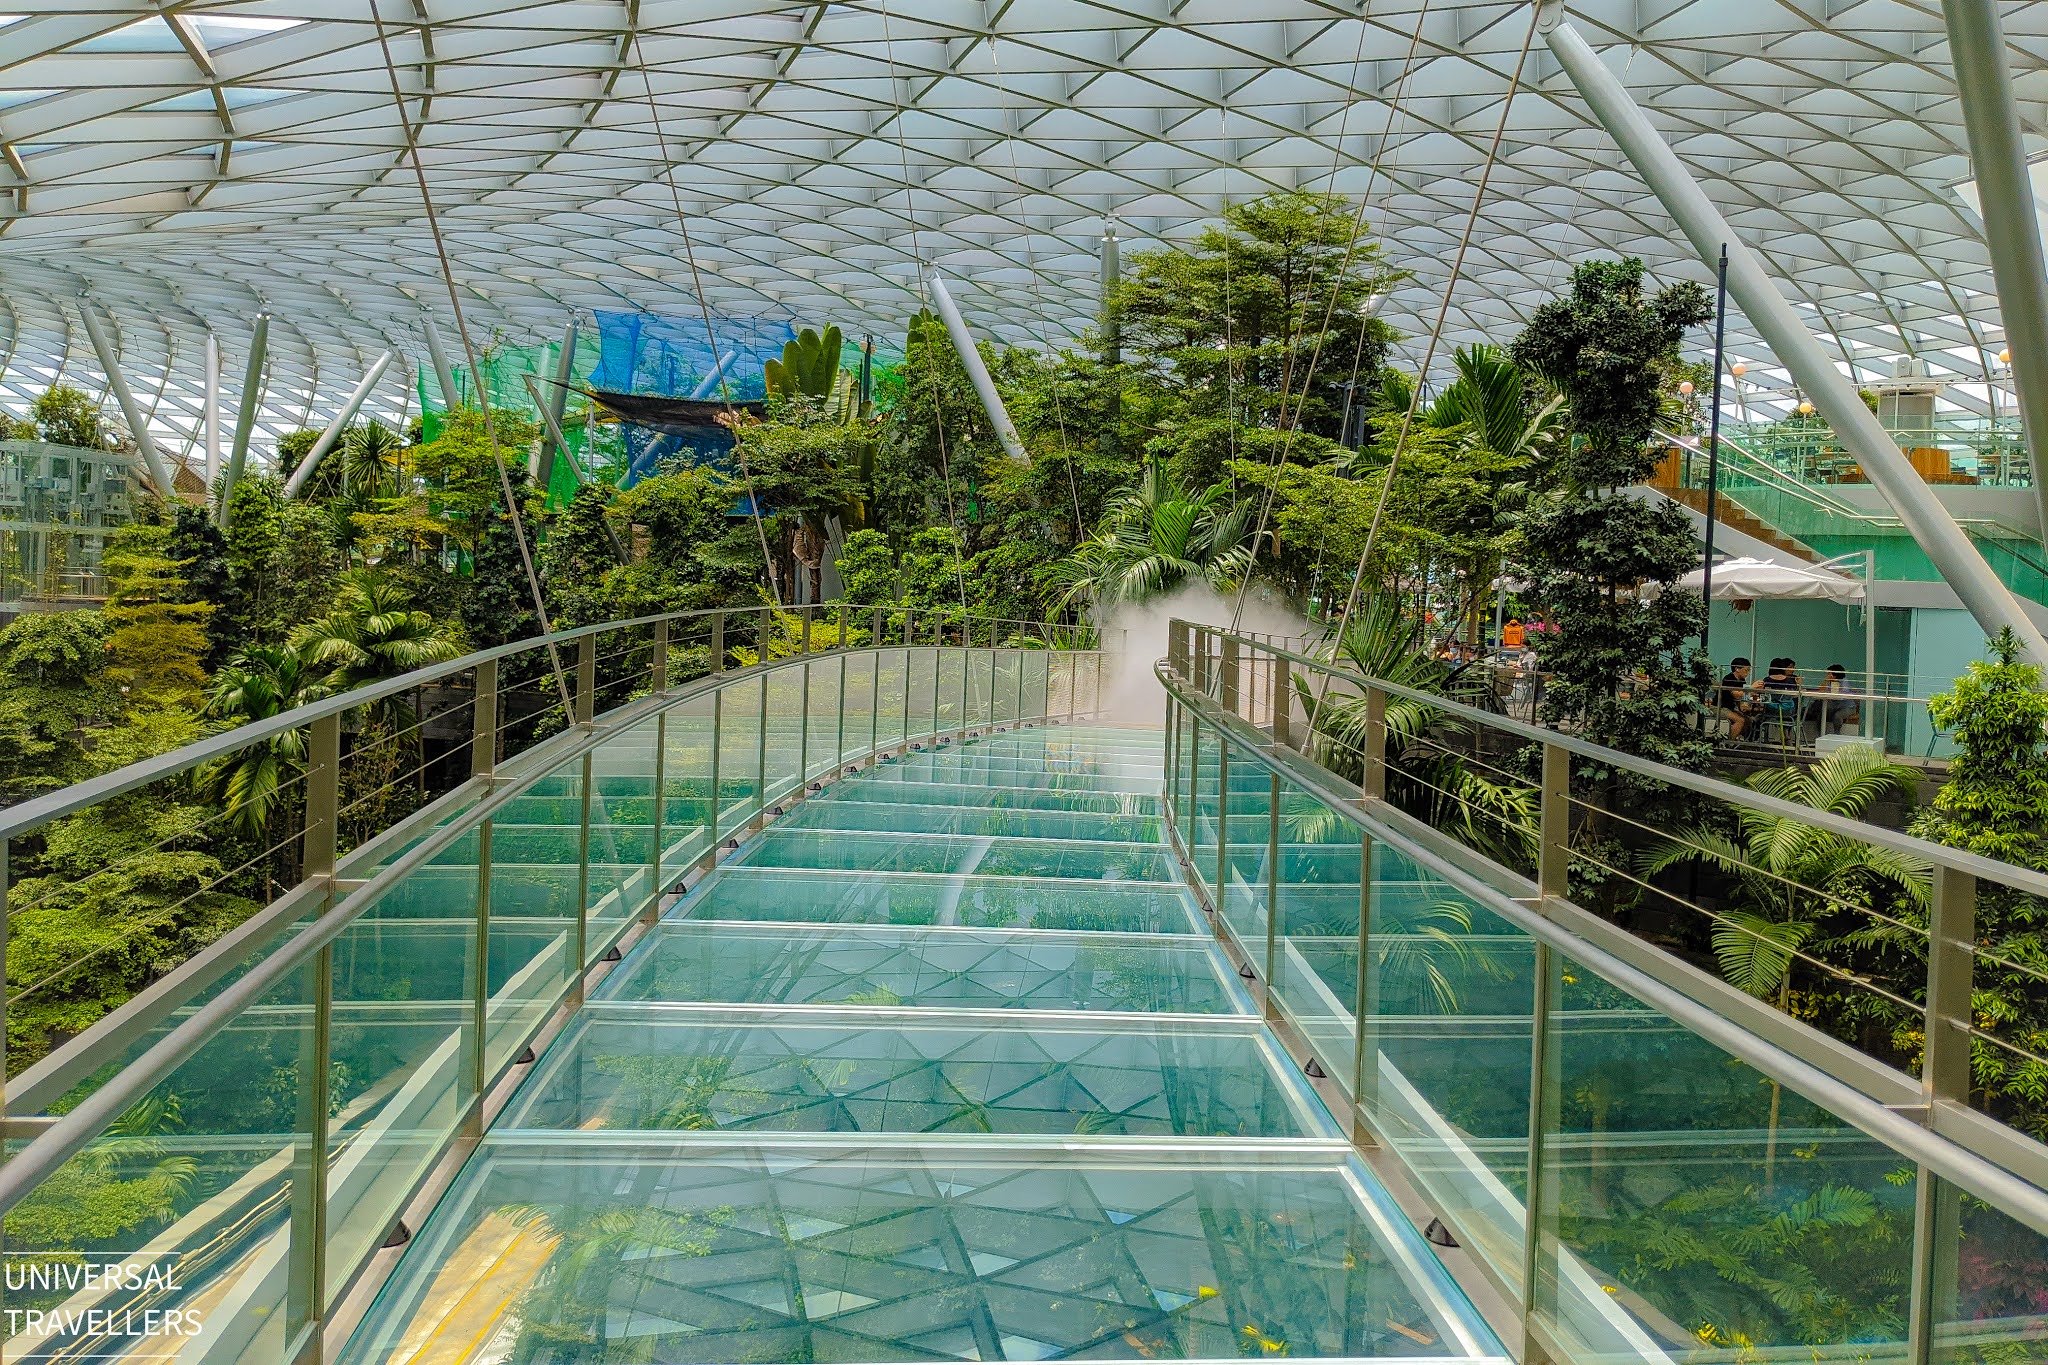 Foggy mist emerging from the ends of the Canopy Bridge, located at level 5 of the Jewel Changi Airport